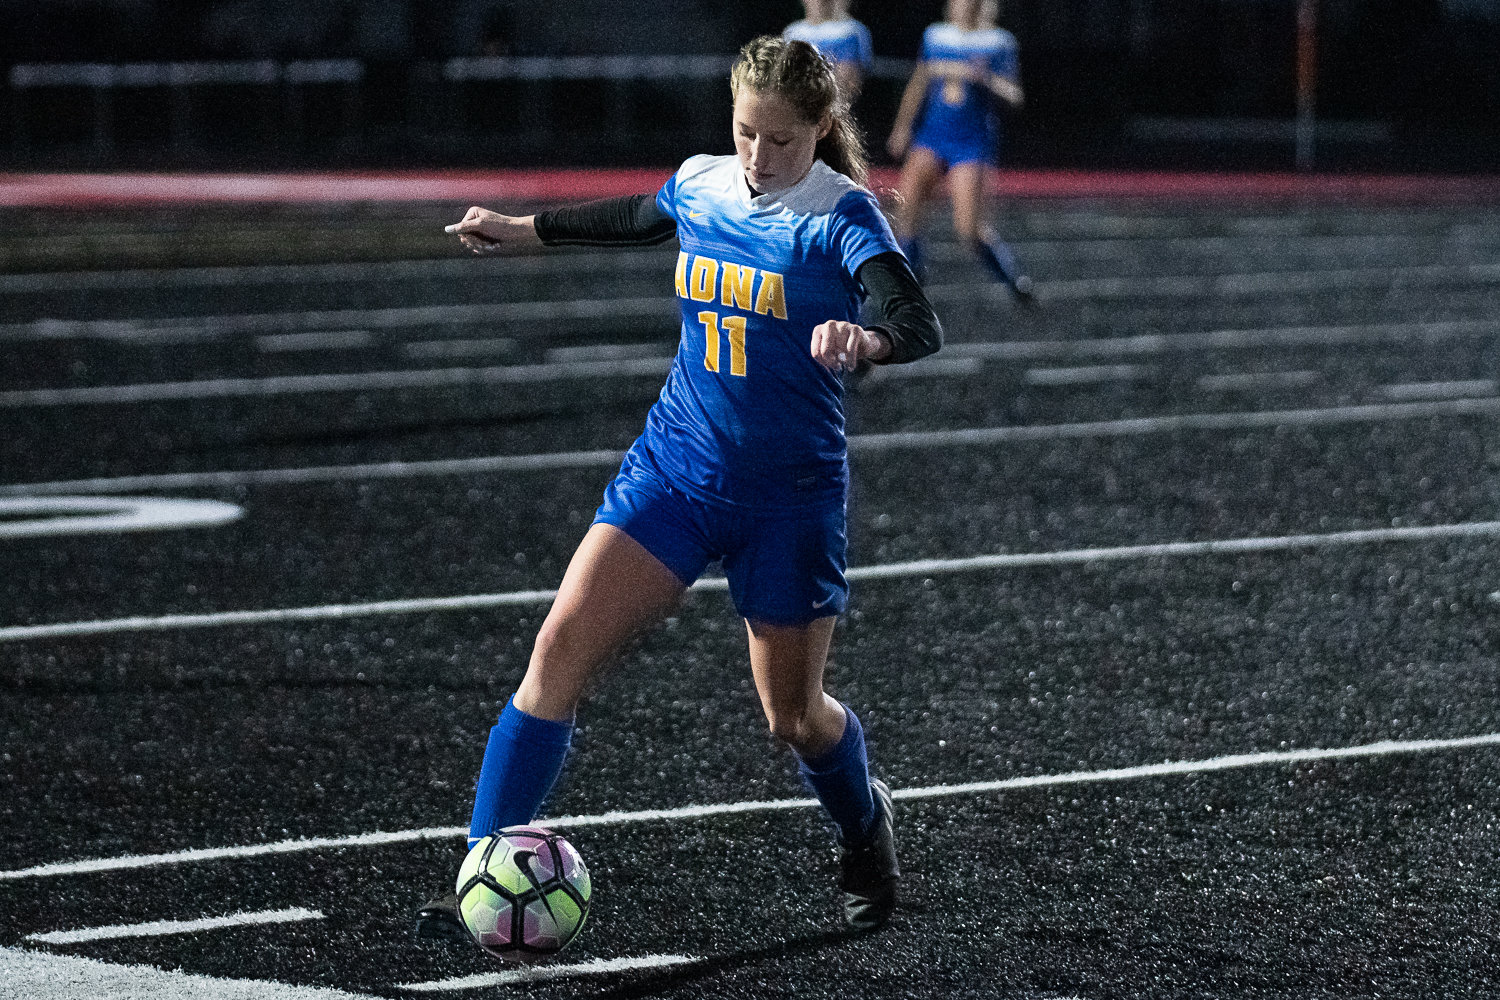 Adna's Bailey Naillon takes the ball up the field against Tonasket in the first round of the state playoffs at Tenino Beaver Stadium Nov. 9.